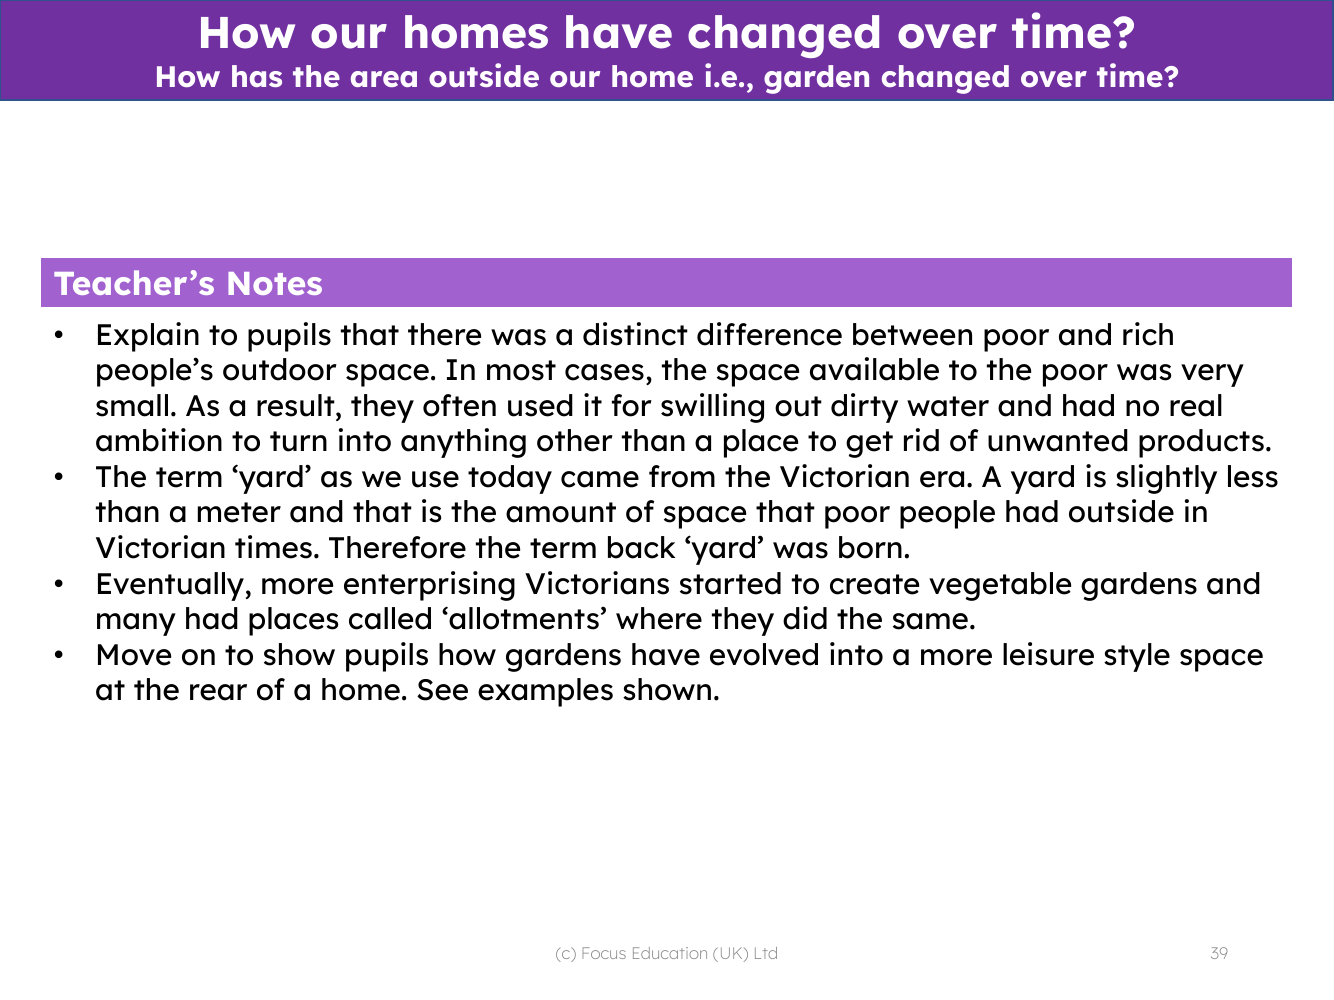 How has the area outside our home changed over time? - Teacher notes